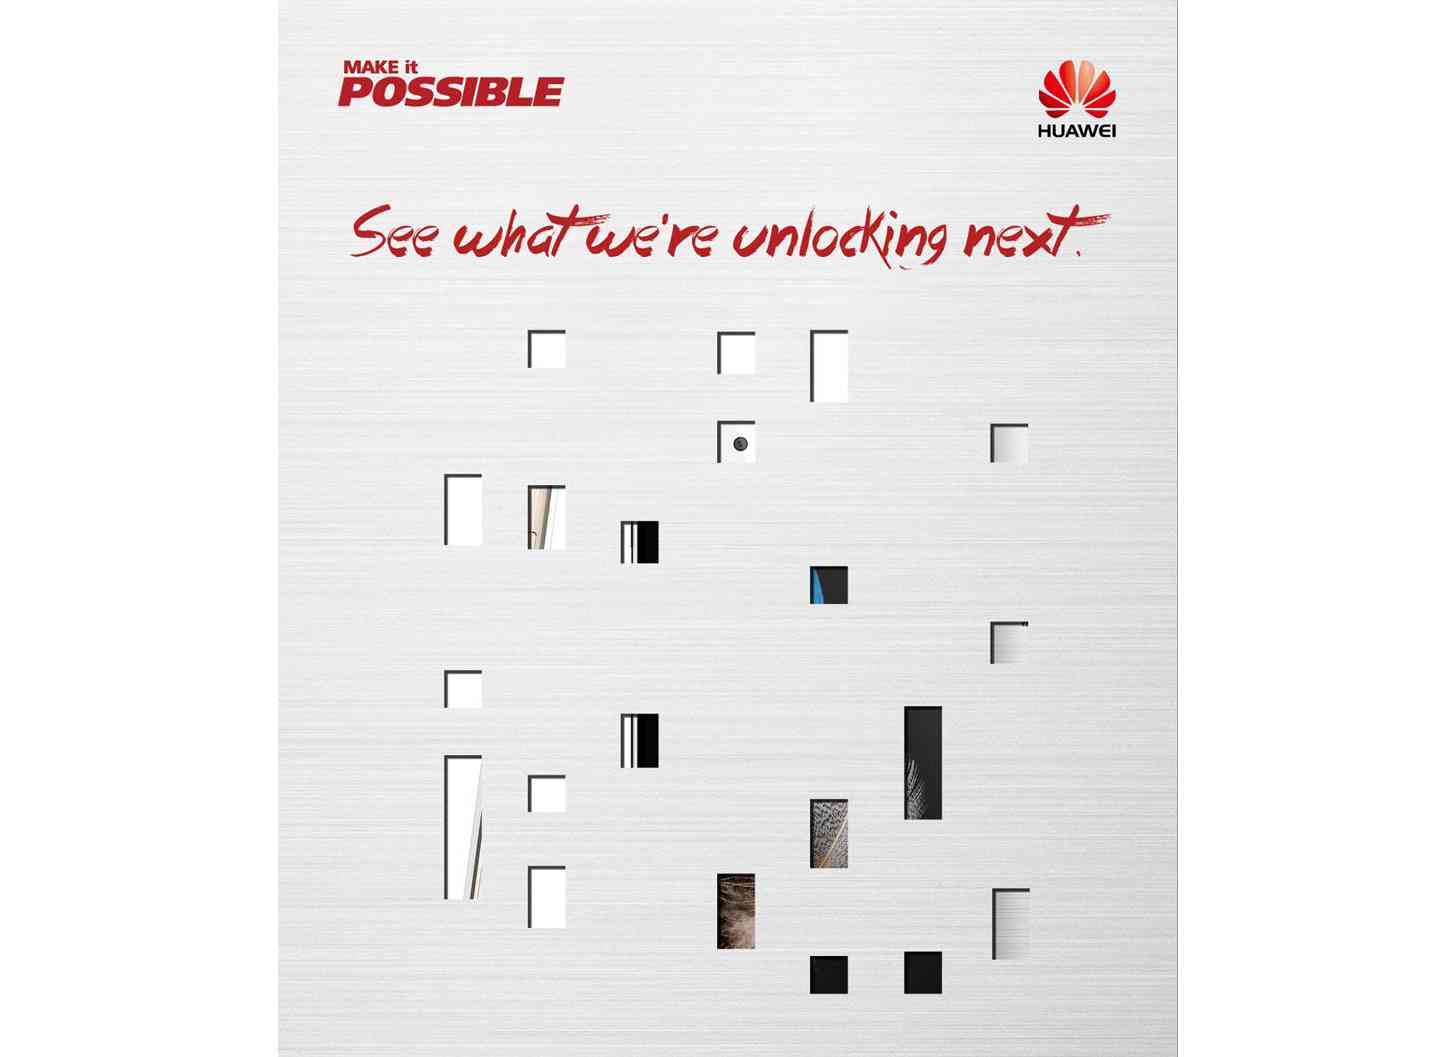 Huawei June 2 event